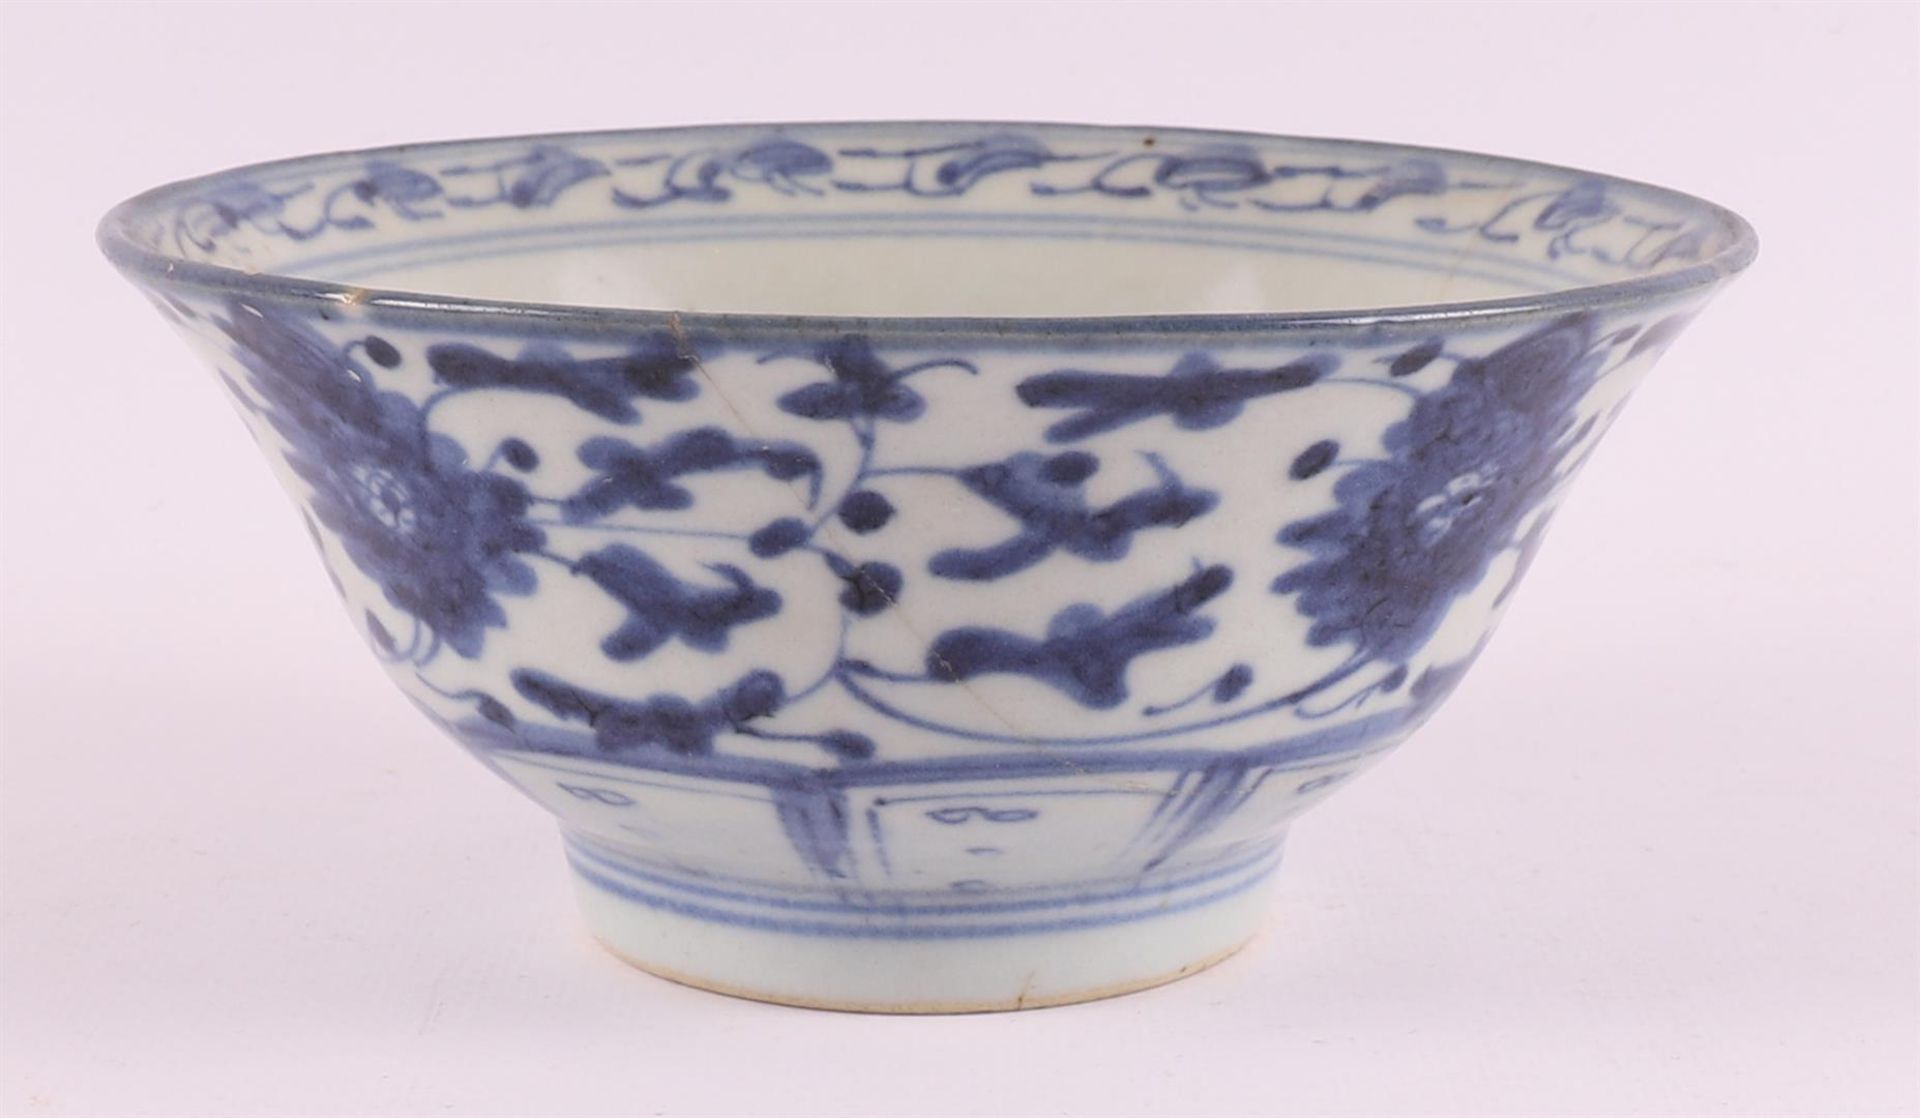 A lot of various Chinese porcelain bowls, China, 18th century - Image 22 of 25